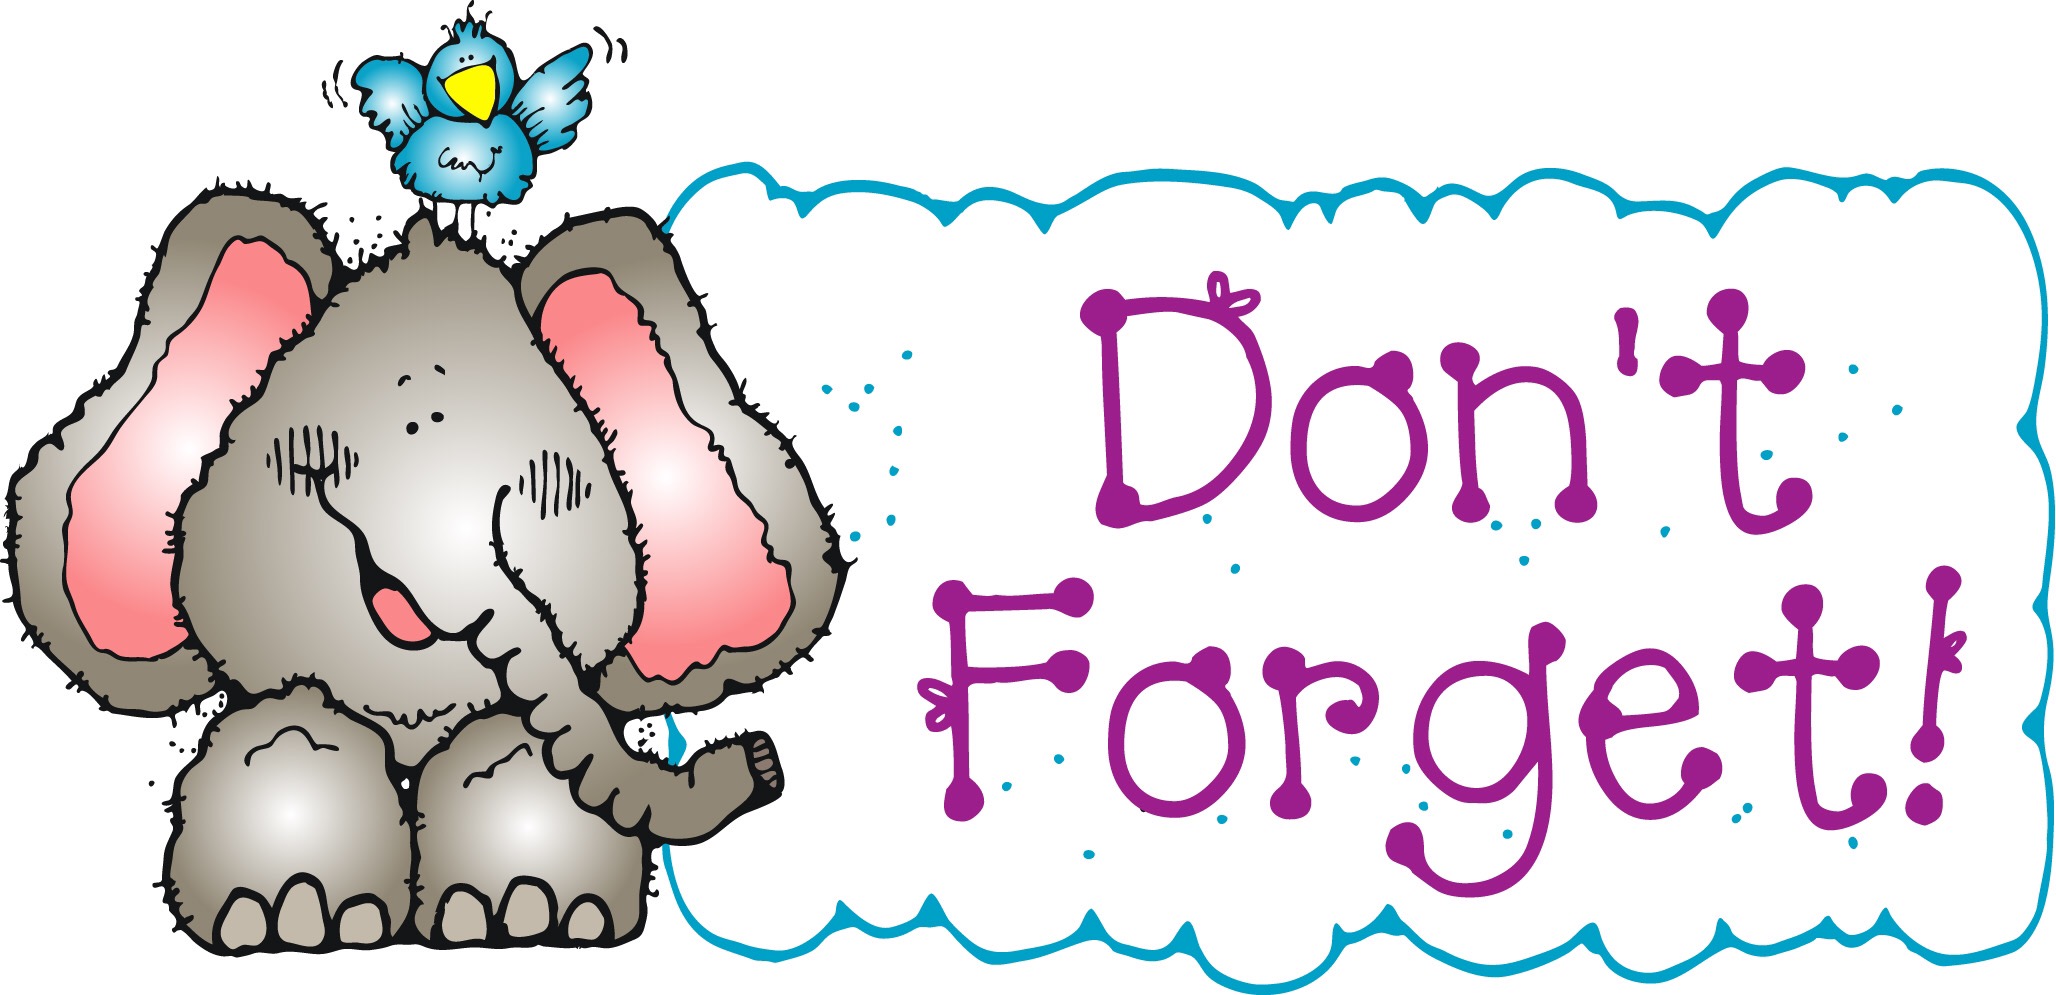 important reminders clipart